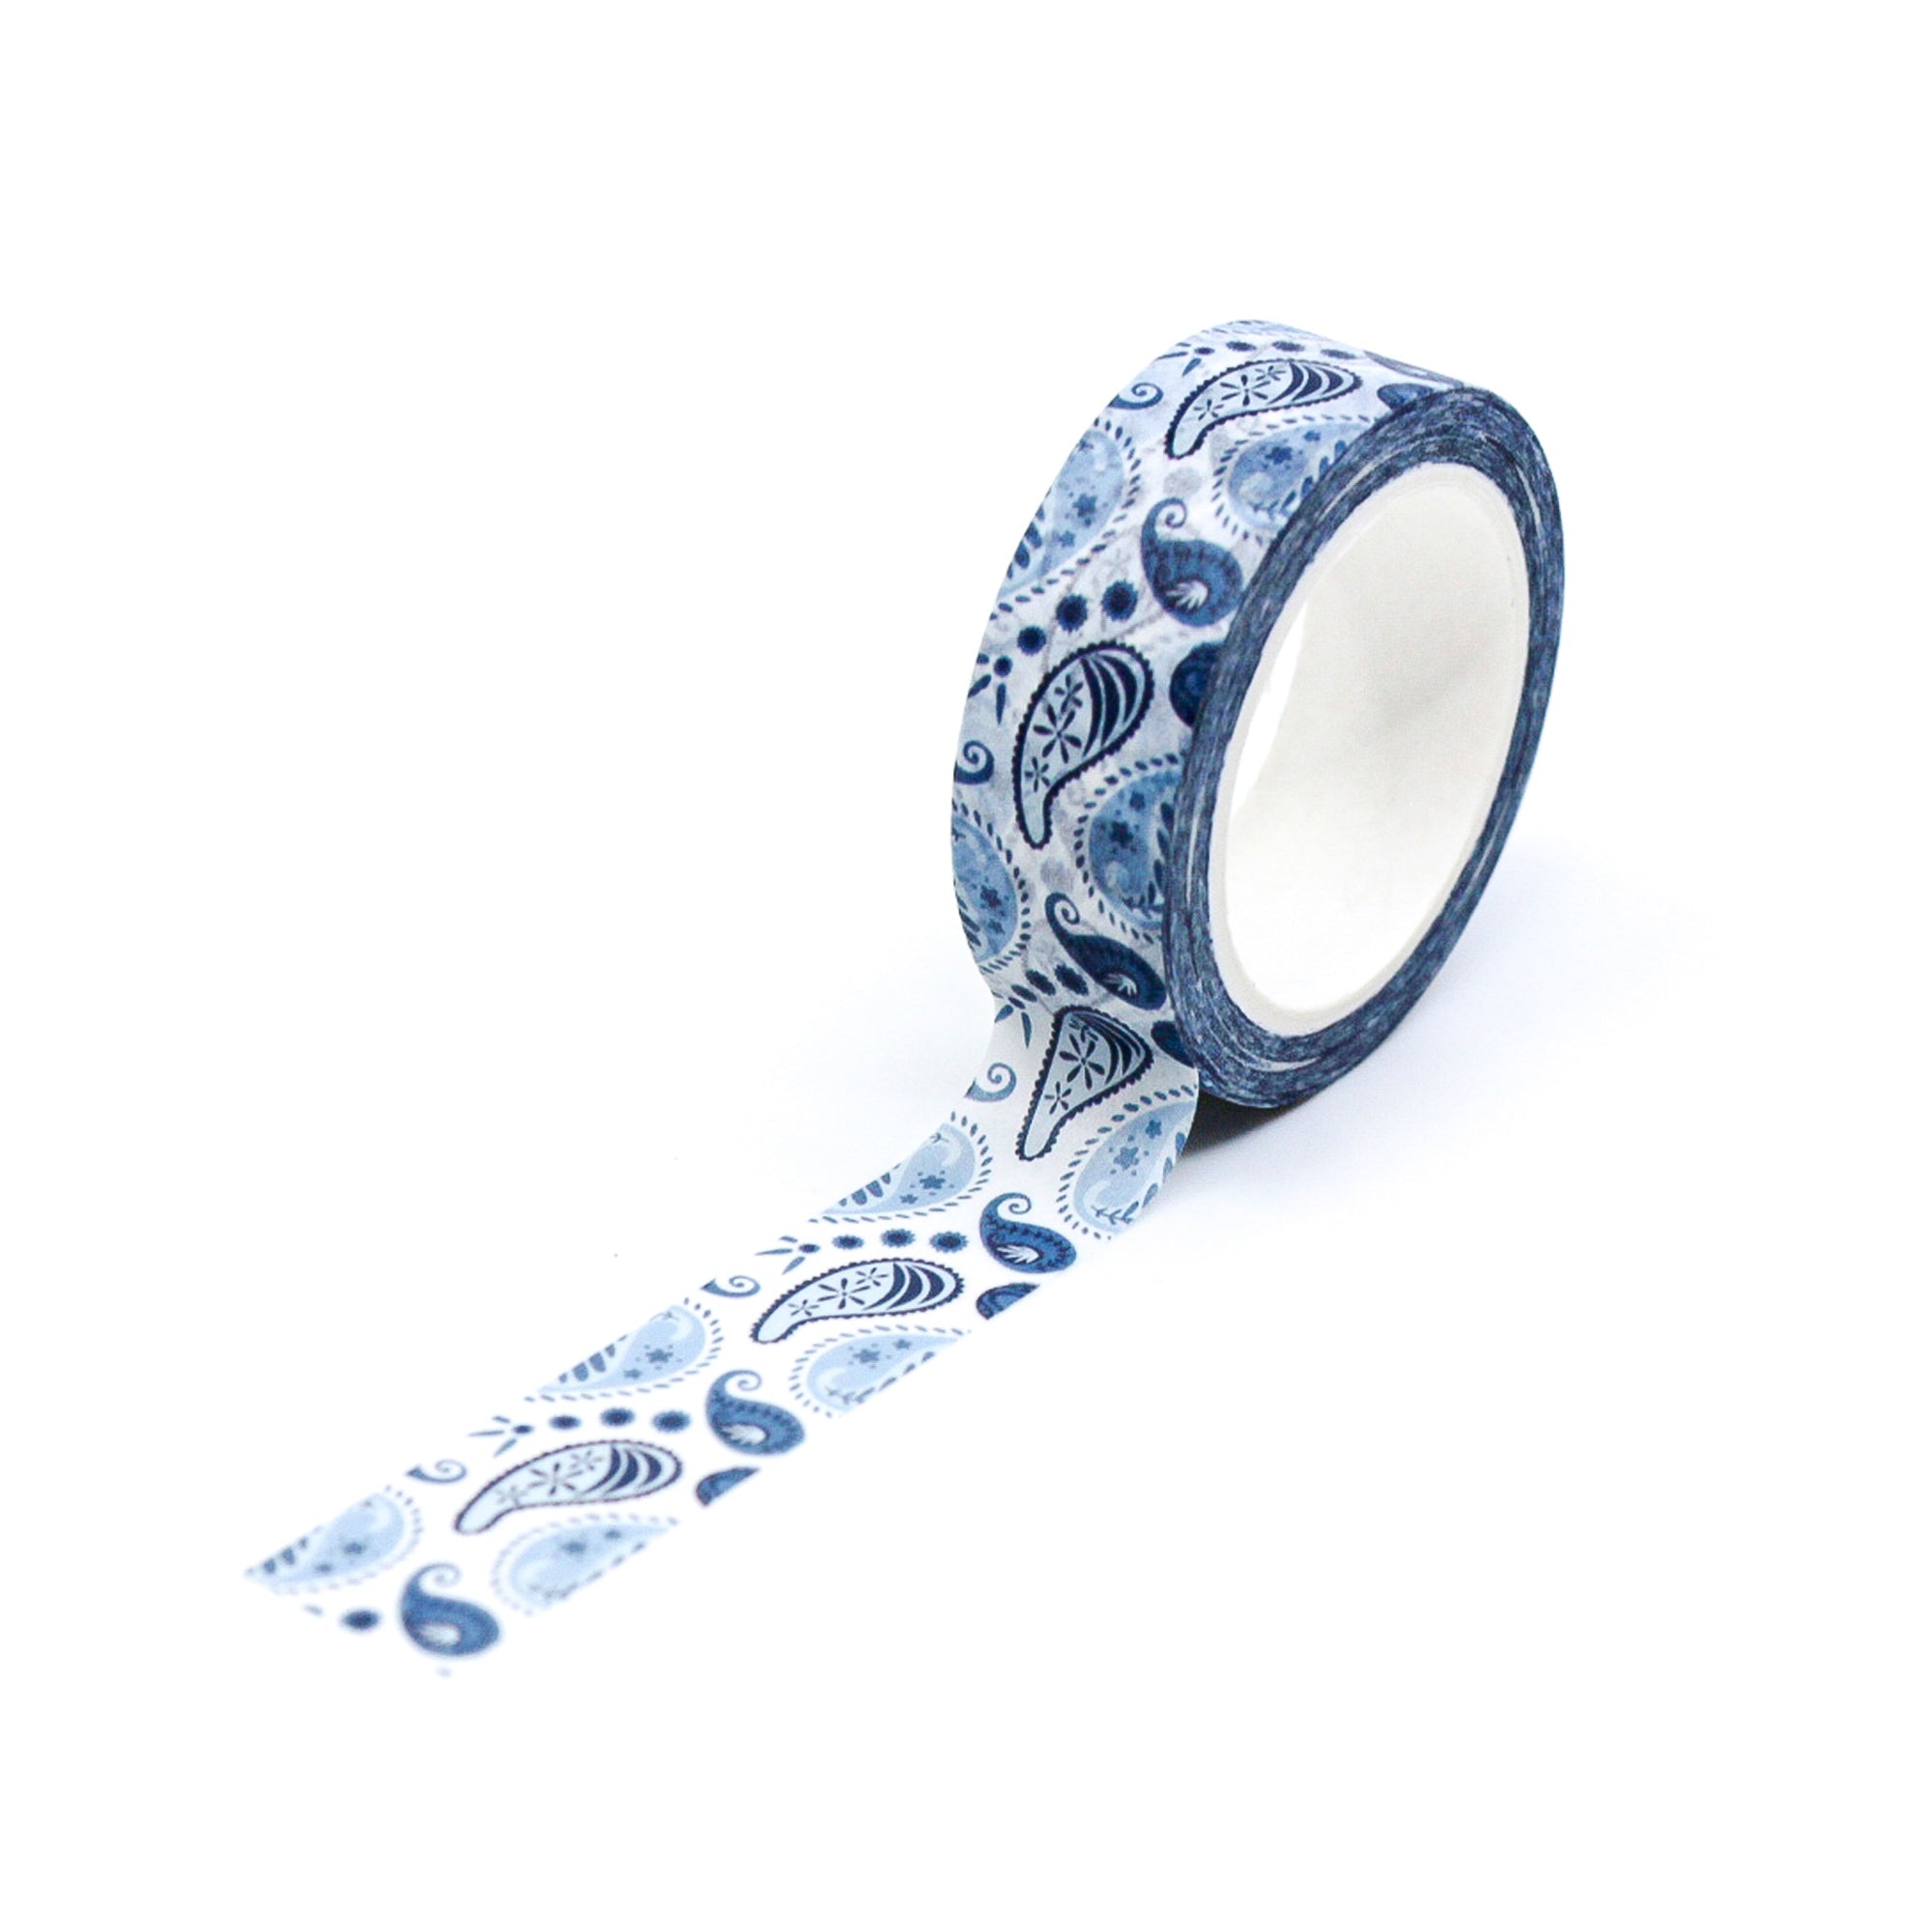 Elevate your crafts with our Embroidery Blue Paisley Washi Tape, featuring a intricate paisley pattern in shades of blue. Ideal for adding a touch of intricate elegance to your projects. This tape is from Maylay Co. and sold at BBB Supplies Craft Shop.